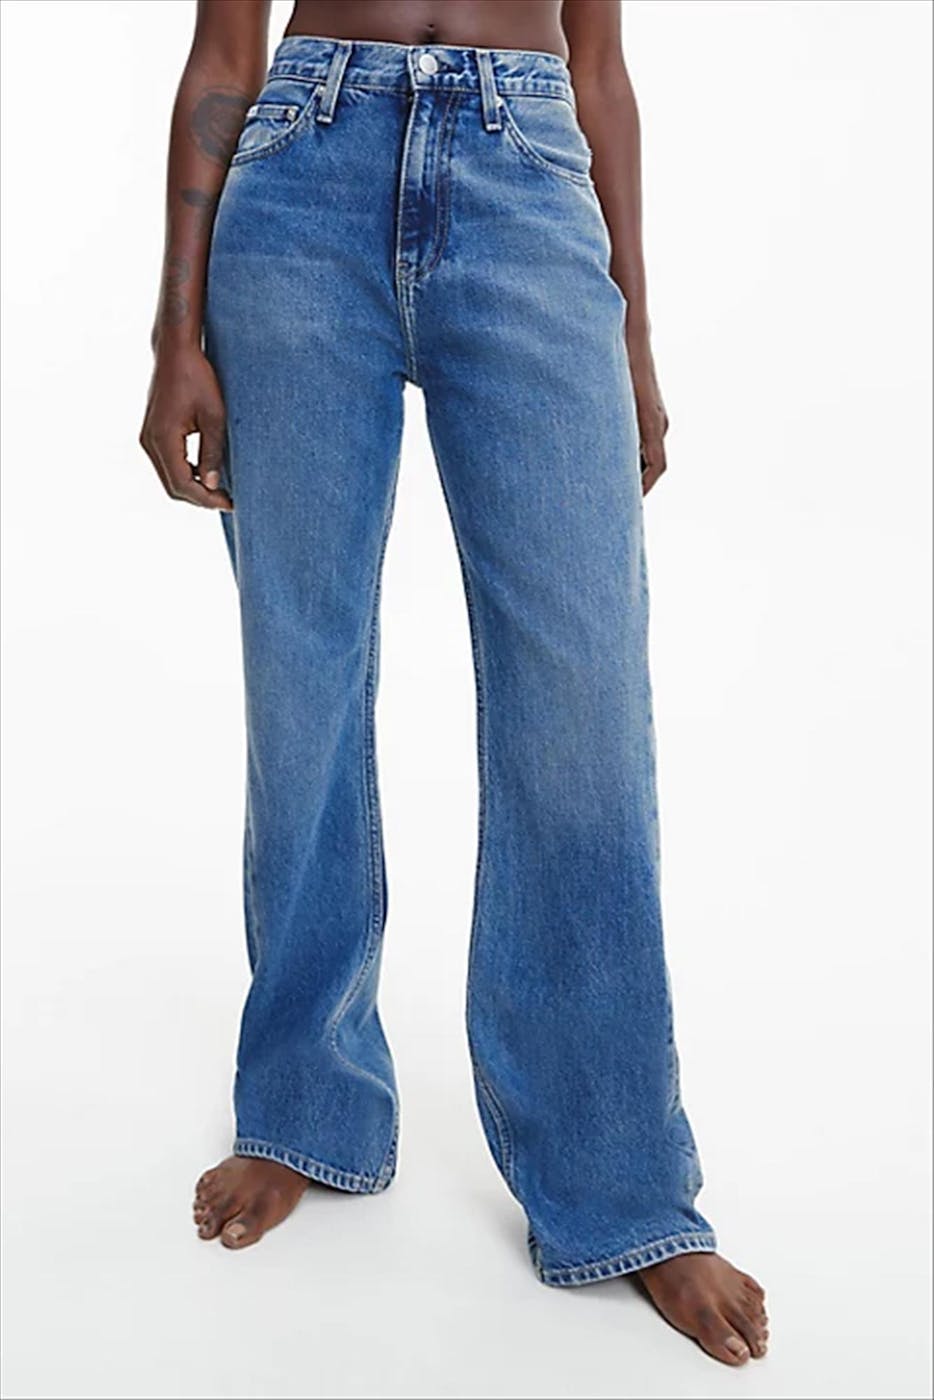 Calvin Klein Jeans - Blauwe Authentic Bootcut jeans